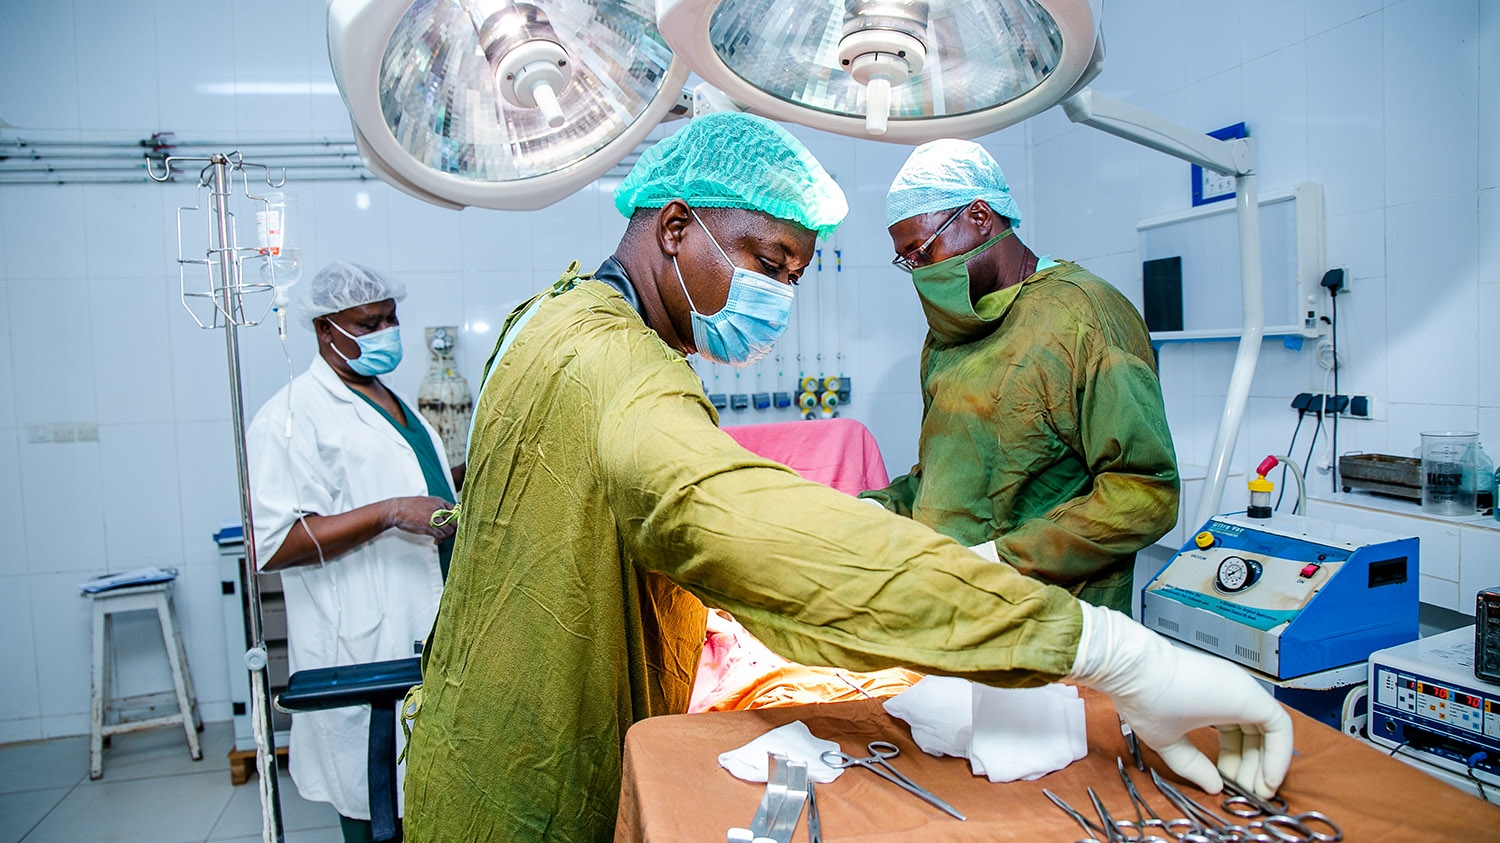 Medical staff perform surgery for hydrocele in an operating theatre.